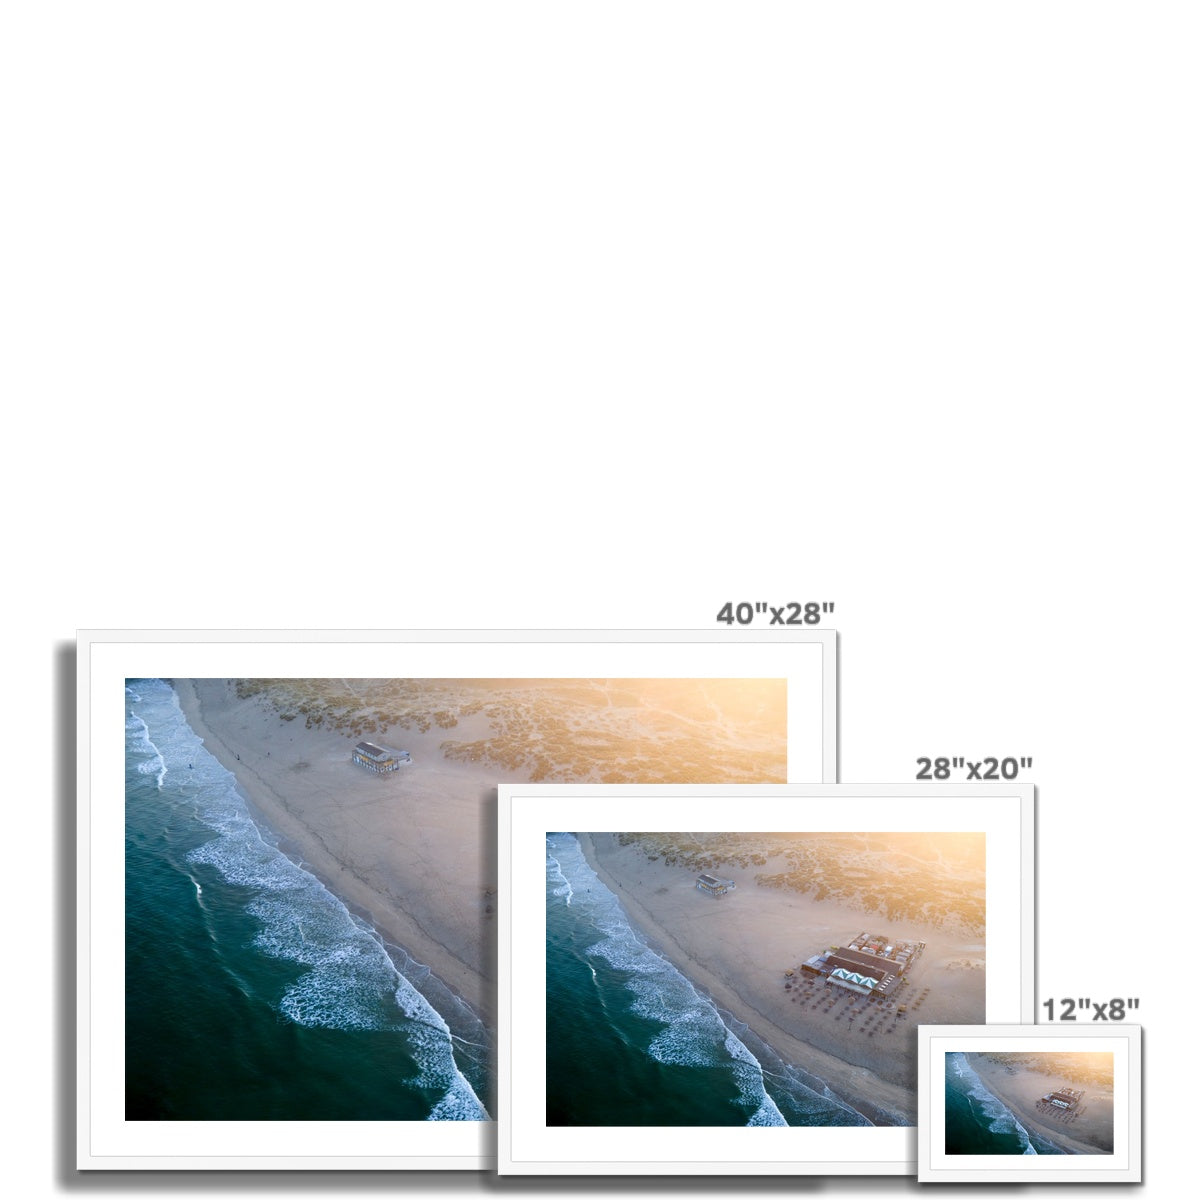 dawn watering hole wooden frame sizes